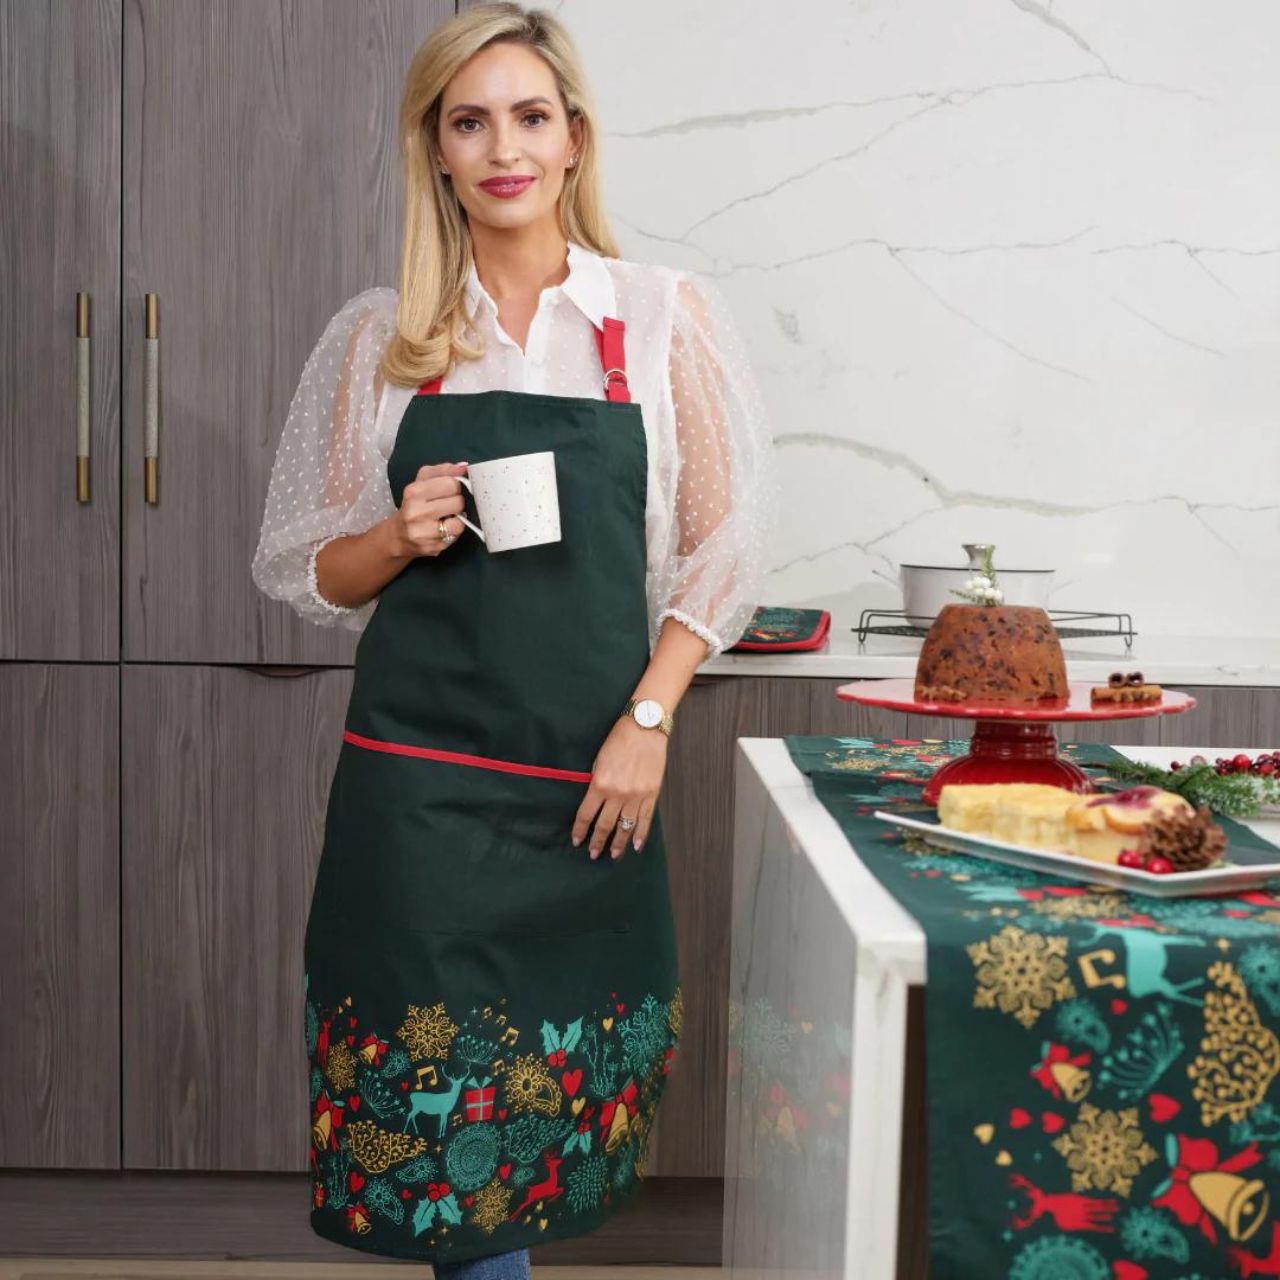 A Christmas Wish Apron by Mindy Brownes Interiors  A beautiful apron finished in forest green with a Christmas design that depicts some of Christmas' key elements, such as reindeer, presents, music notes, and more.  A stylish, yet practical way to avoid any outfit mishaps while baking and cooking this Christmas season.